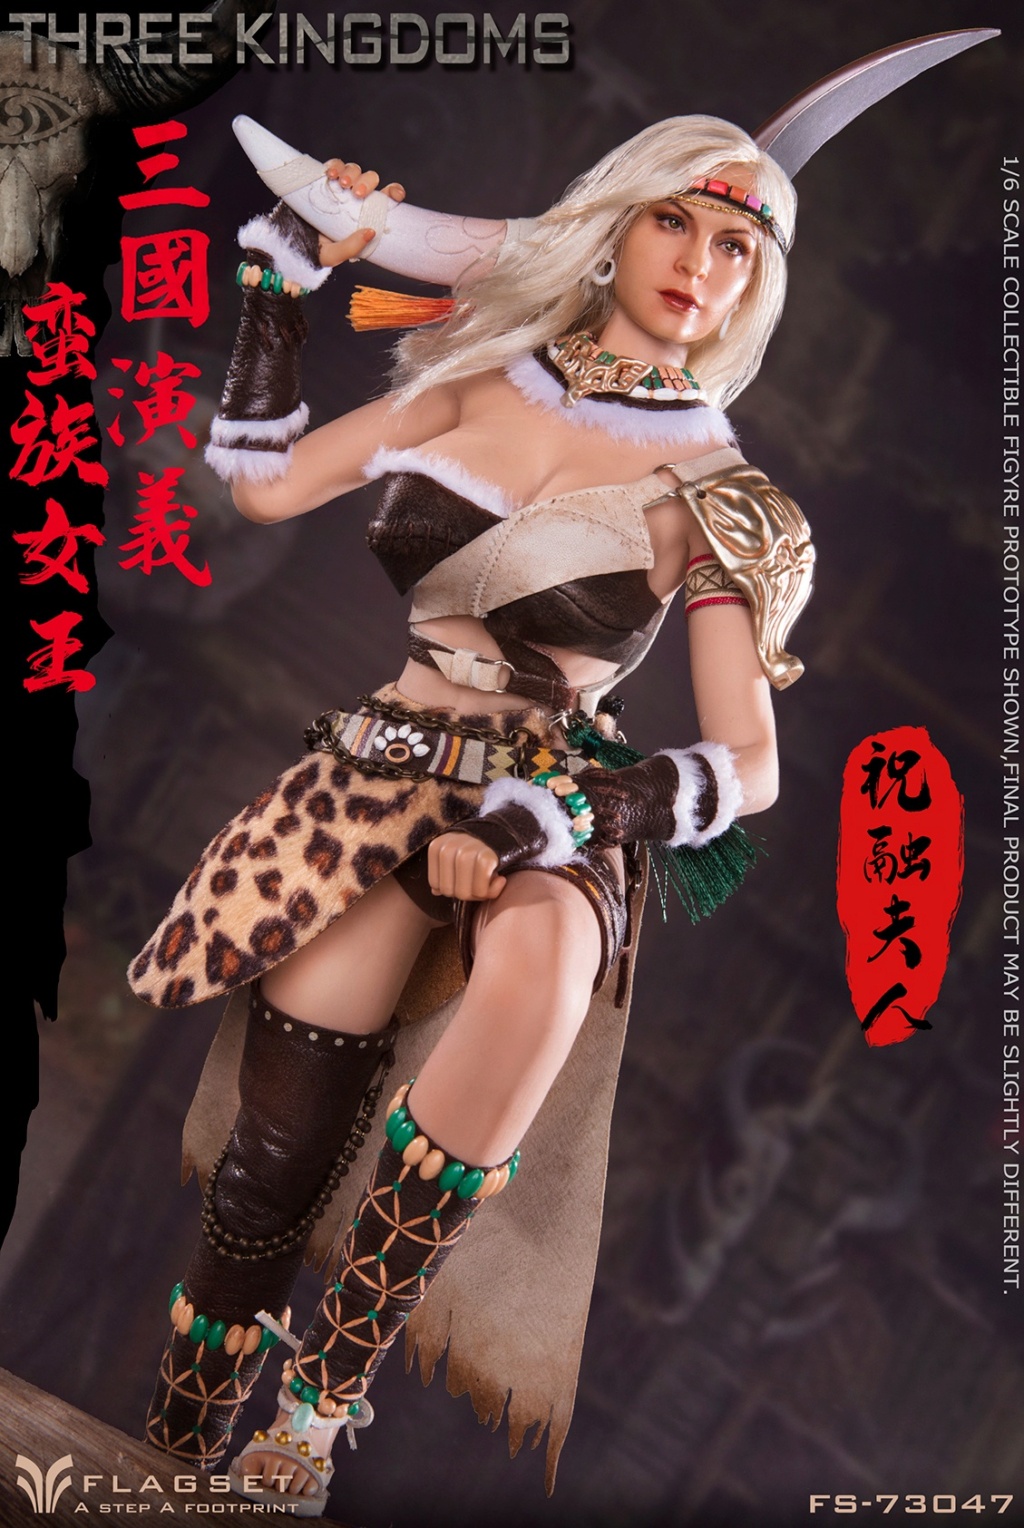 FS-73047 - NEW PRODUCT: FLAGSET: 1/6 Three Kingdoms: Southern Barbarian Female General - Zhu Rong #FS-73047 23323010